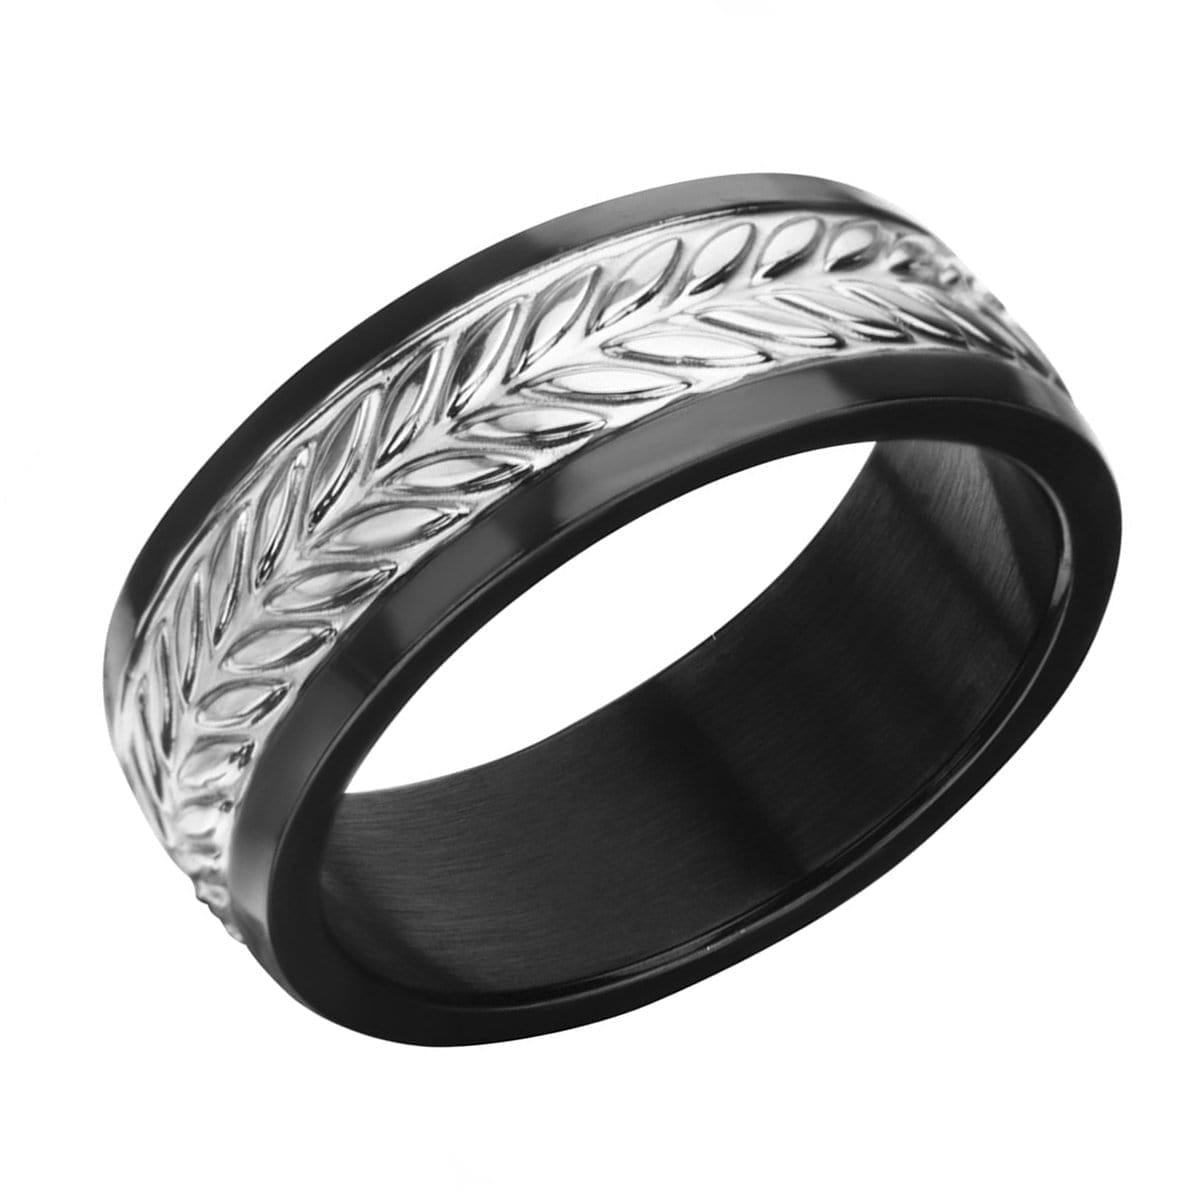 INOX JEWELRY Rings Black and Silver Tone Stainless Steel Leaf Patterned Band